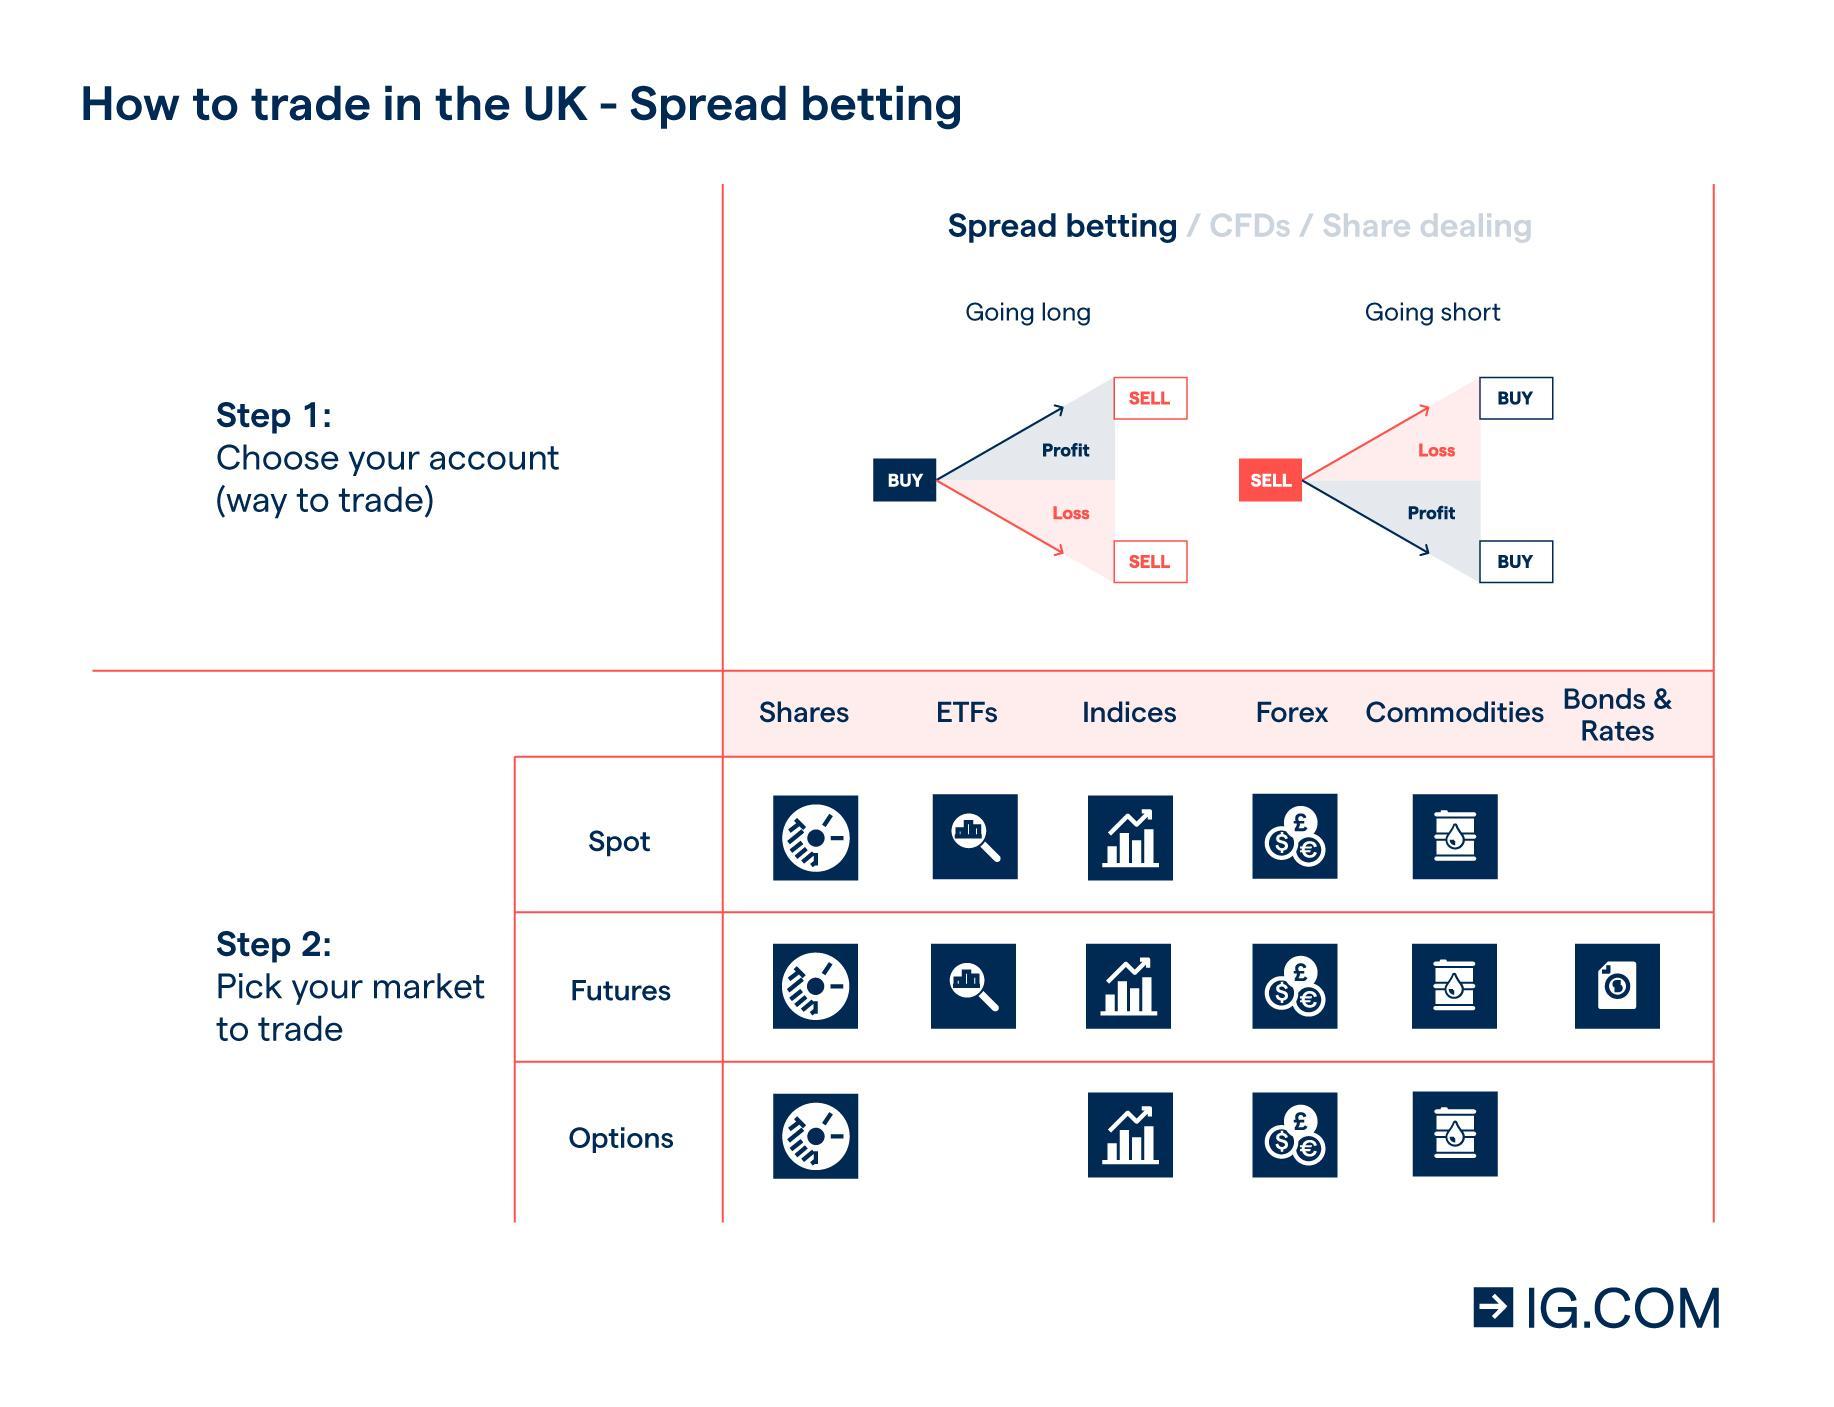 How to trade spread betting in the UK